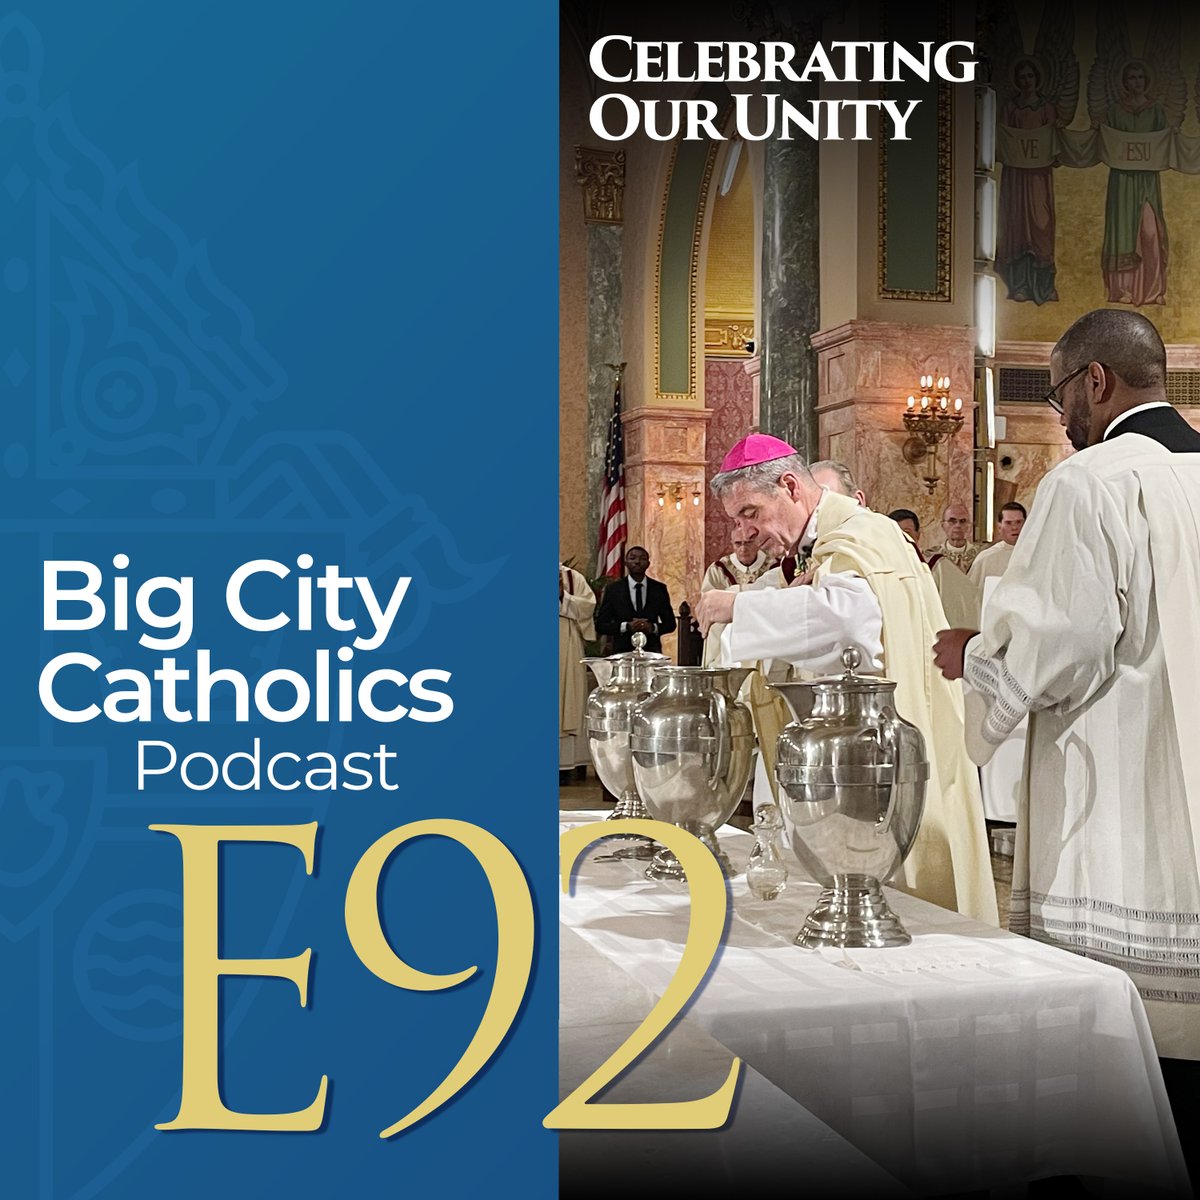 Our newest episode of #BigCityCatholics releases tomorrow. If you haven't already, catch up on last week's special episode talking about unity within the Church and our diocese. Click the link for the full episode: bit.ly/43NVdHj #unity #chrismmass #easterseason